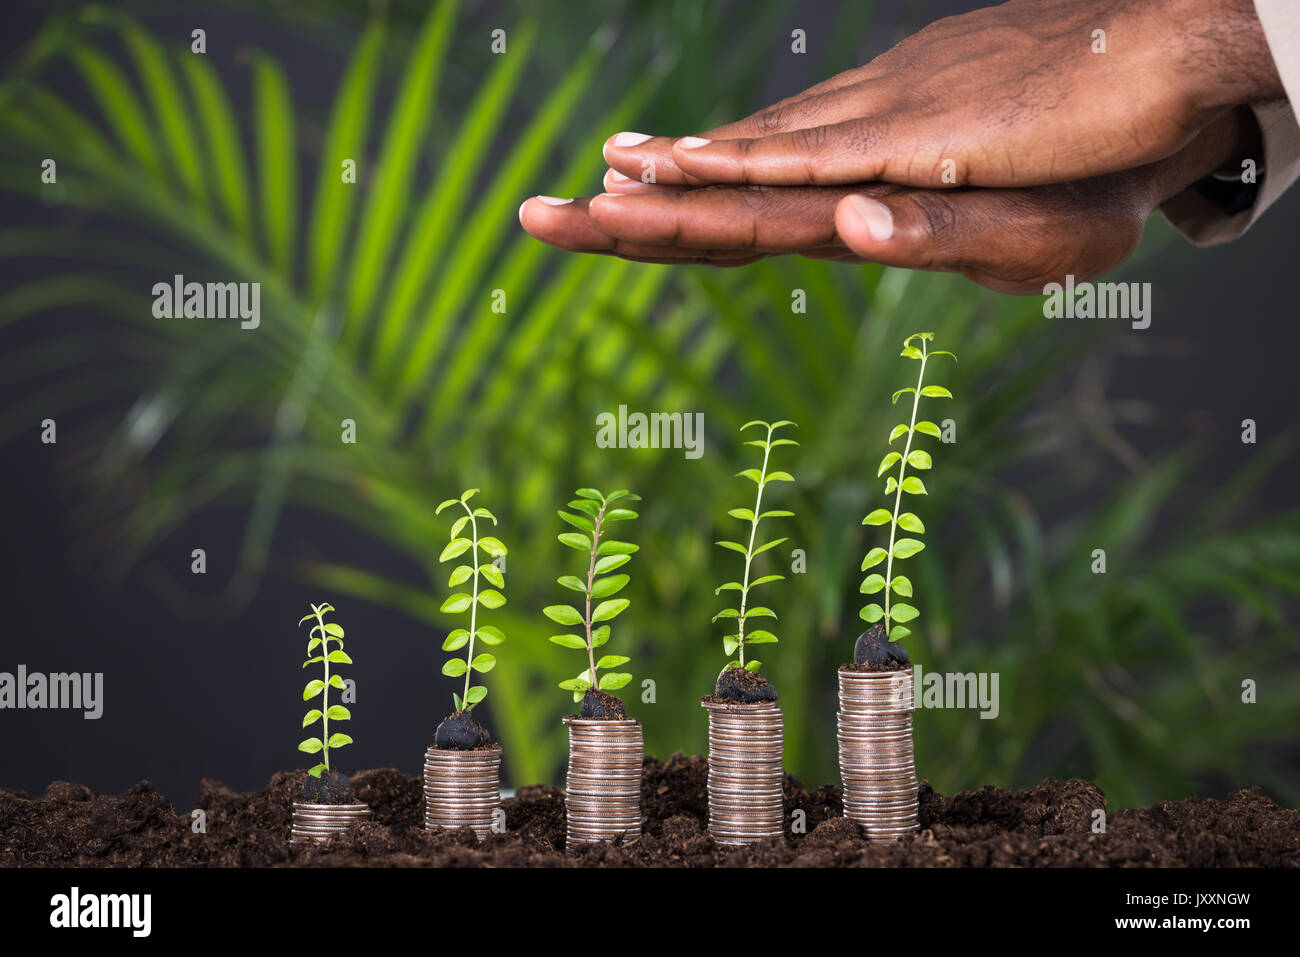 Person's Hand Protecting Small Plant On Stacked Coins Stock Photo